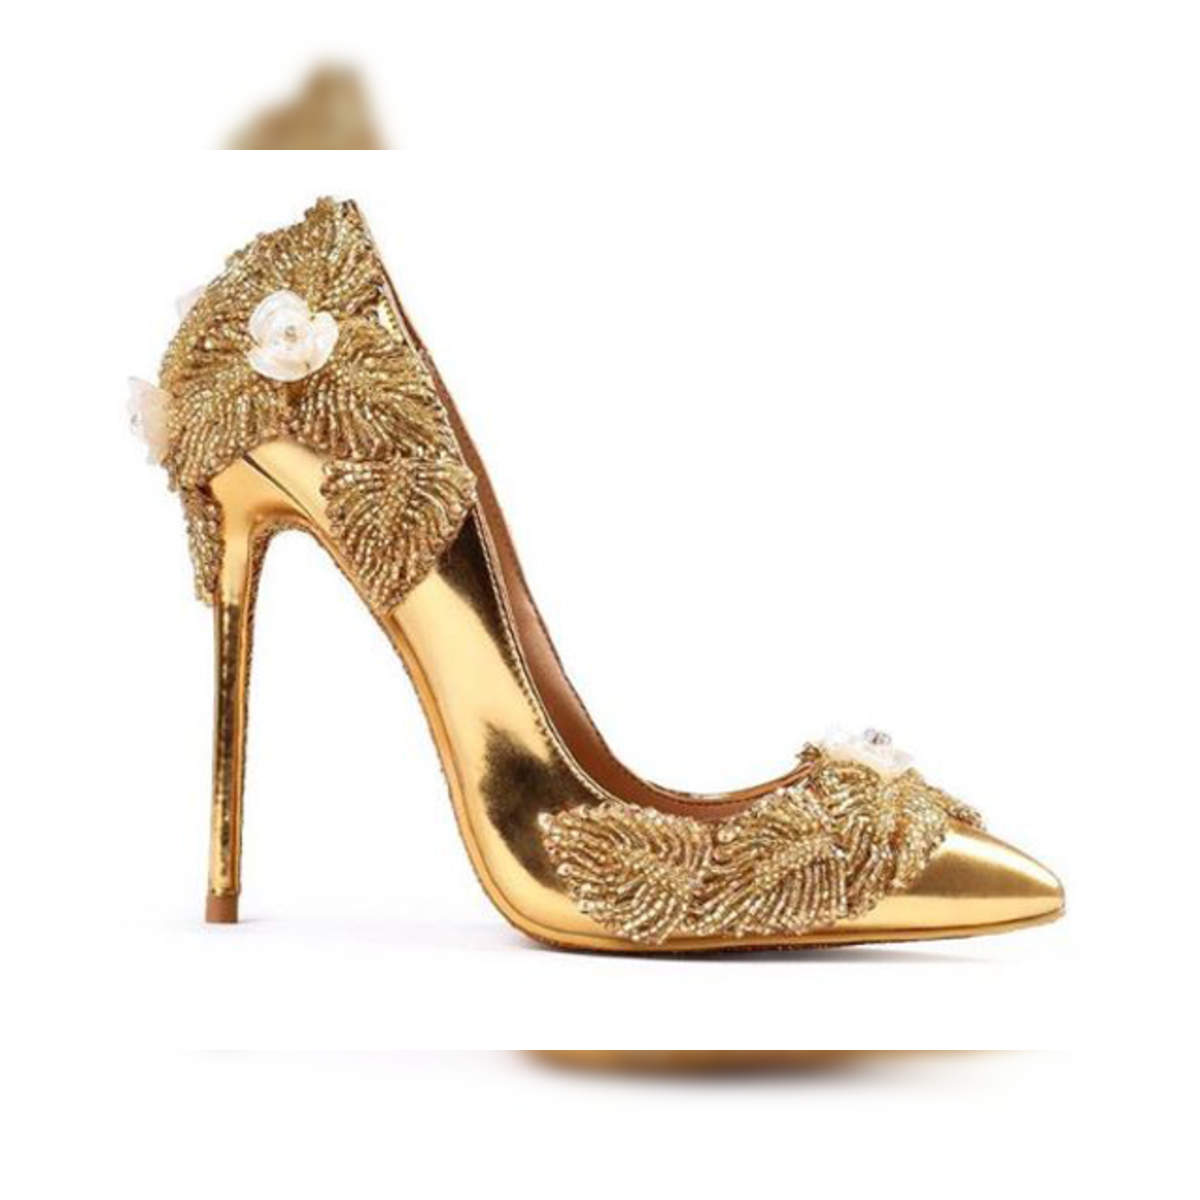 The Most Expensive Designer Heels in the World – VICE VERSA